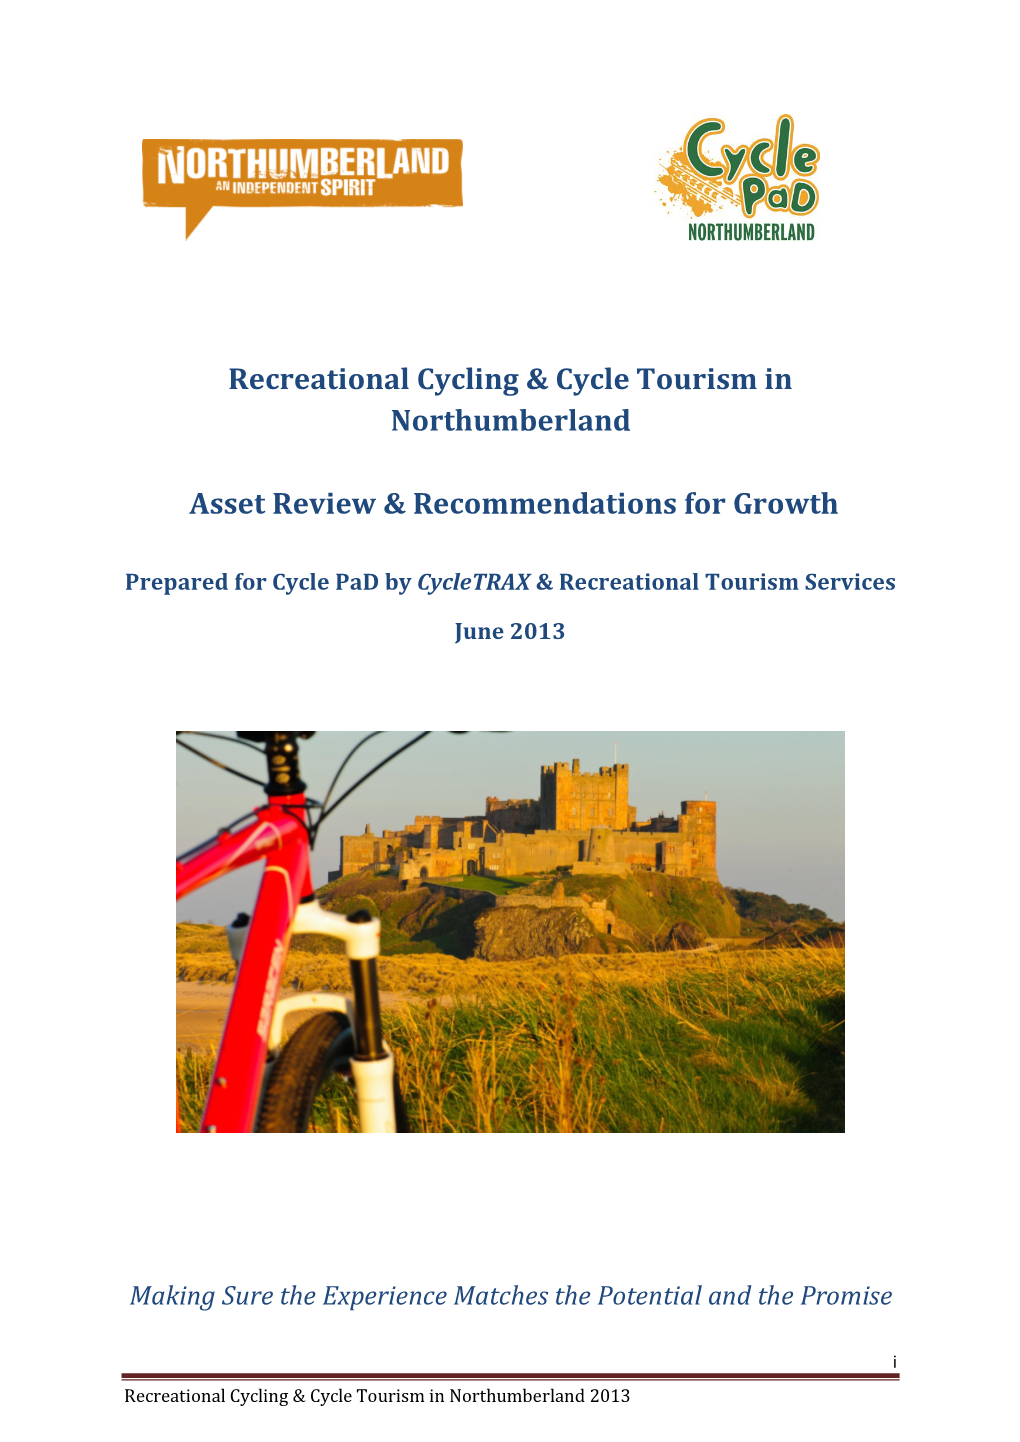 Recreational Cycling & Cycle Tourism in Northumberland Asset Review